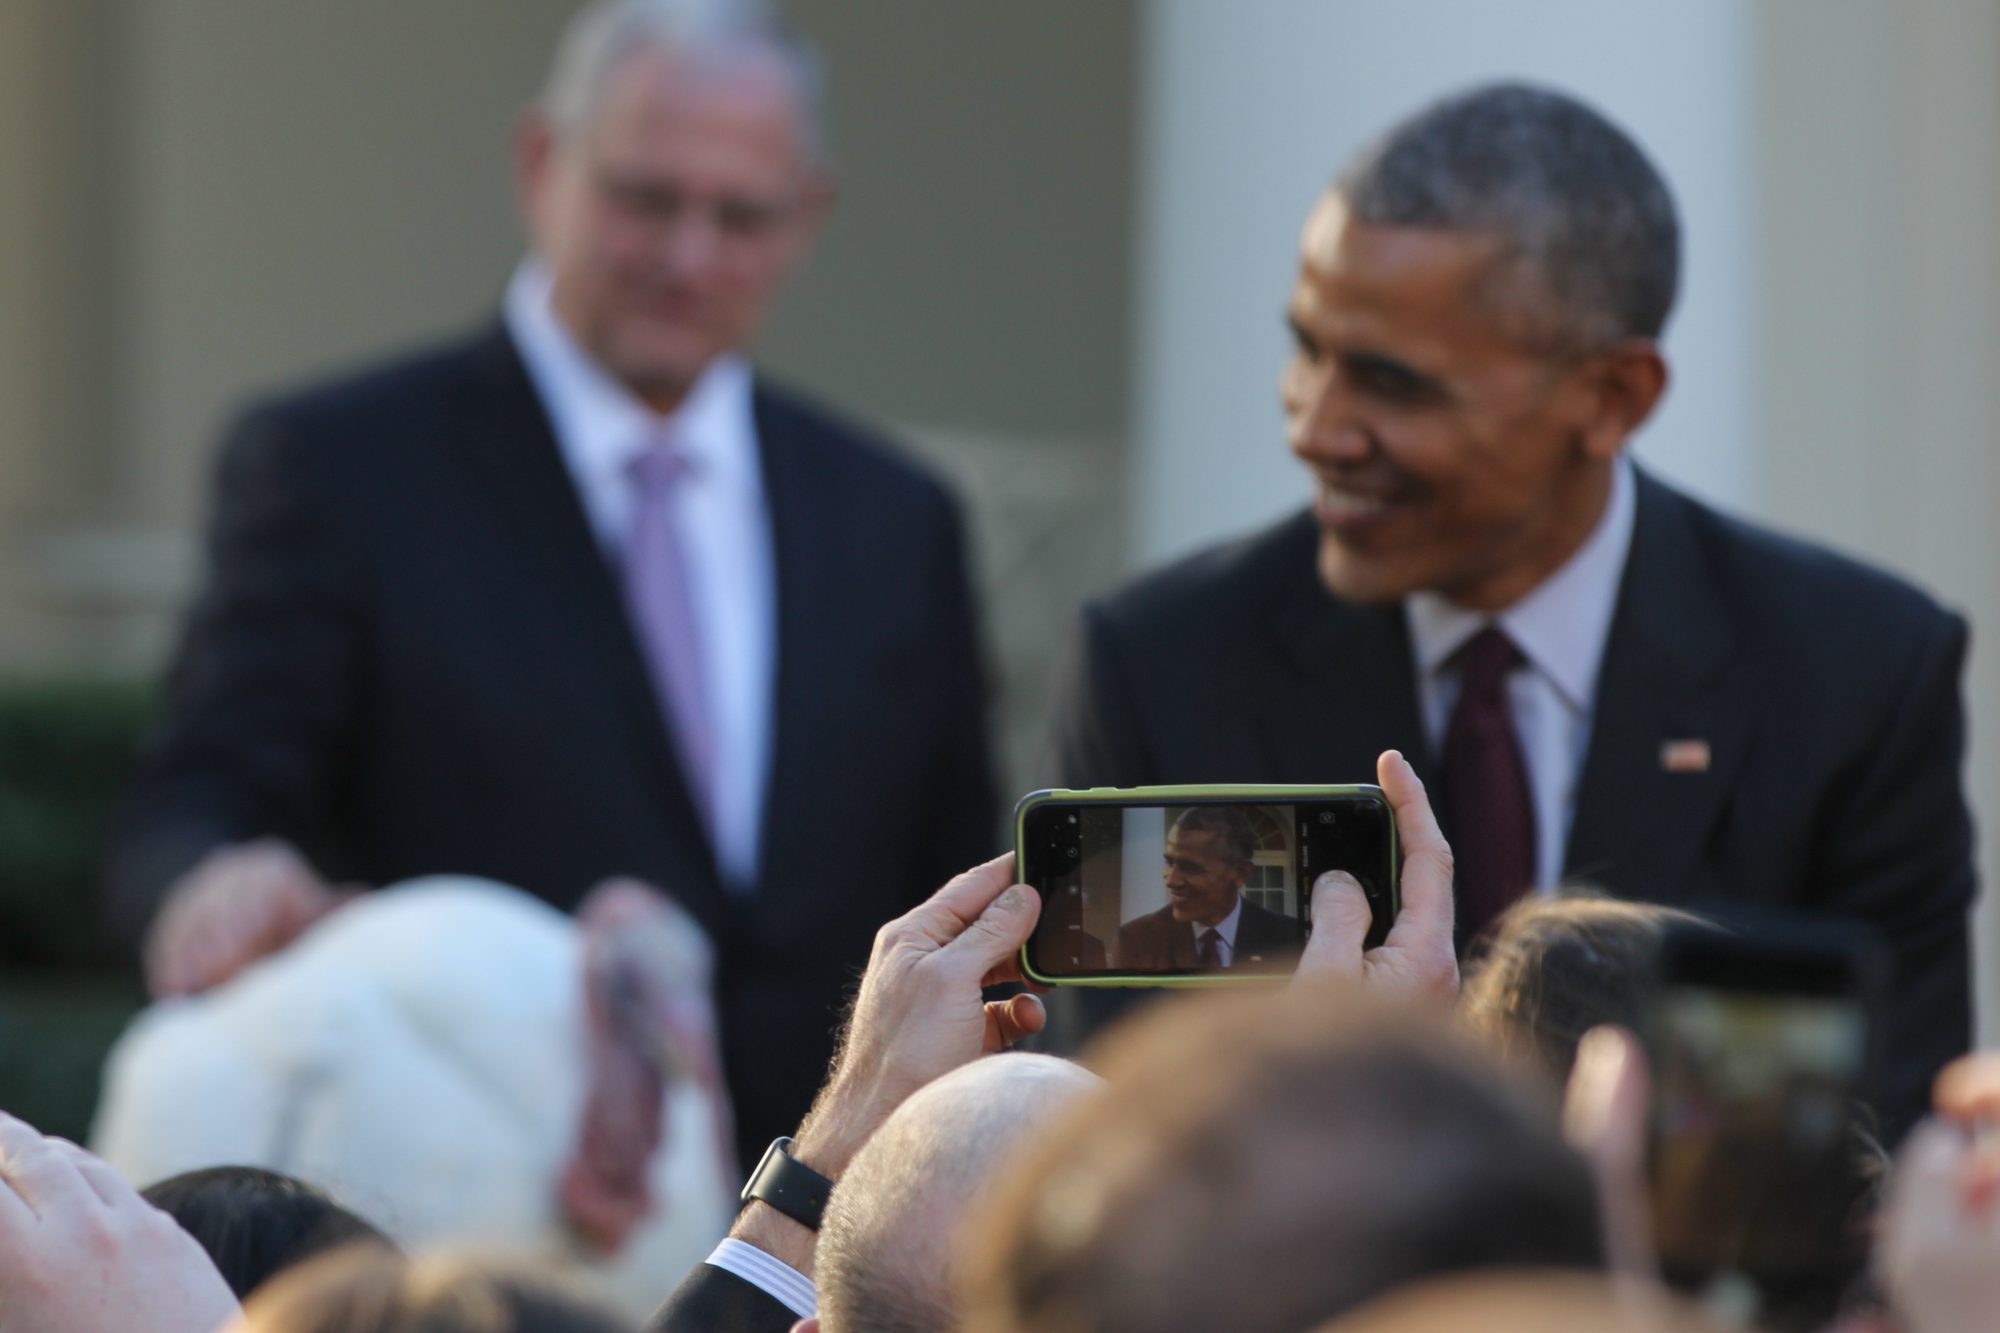 Obama poses with Tot as the crowd eagerly takes photos of them.